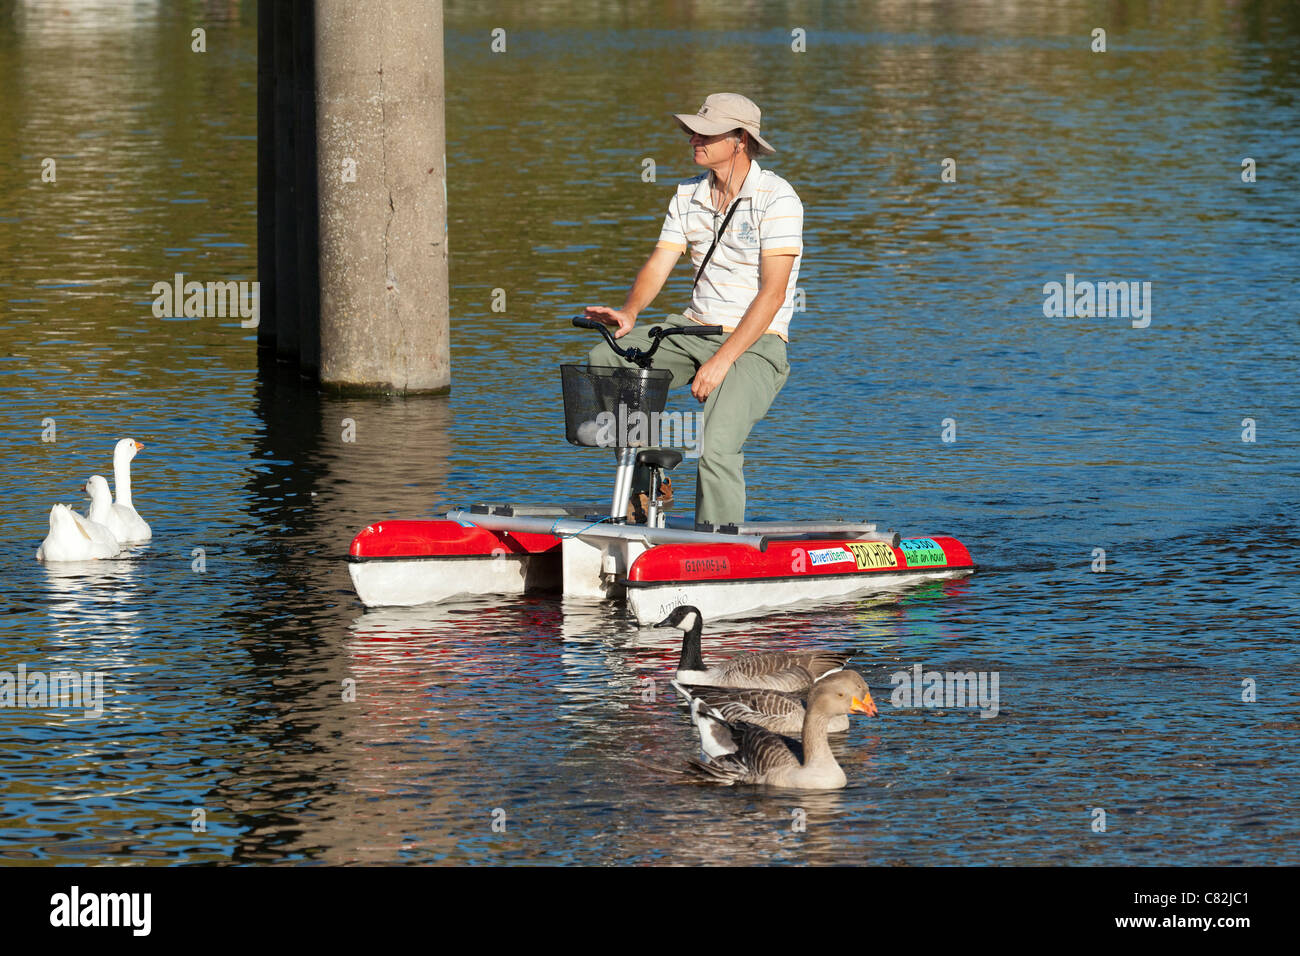 human powered catamaran boat on the River Great Ouse in Ely, UK Stock Photo